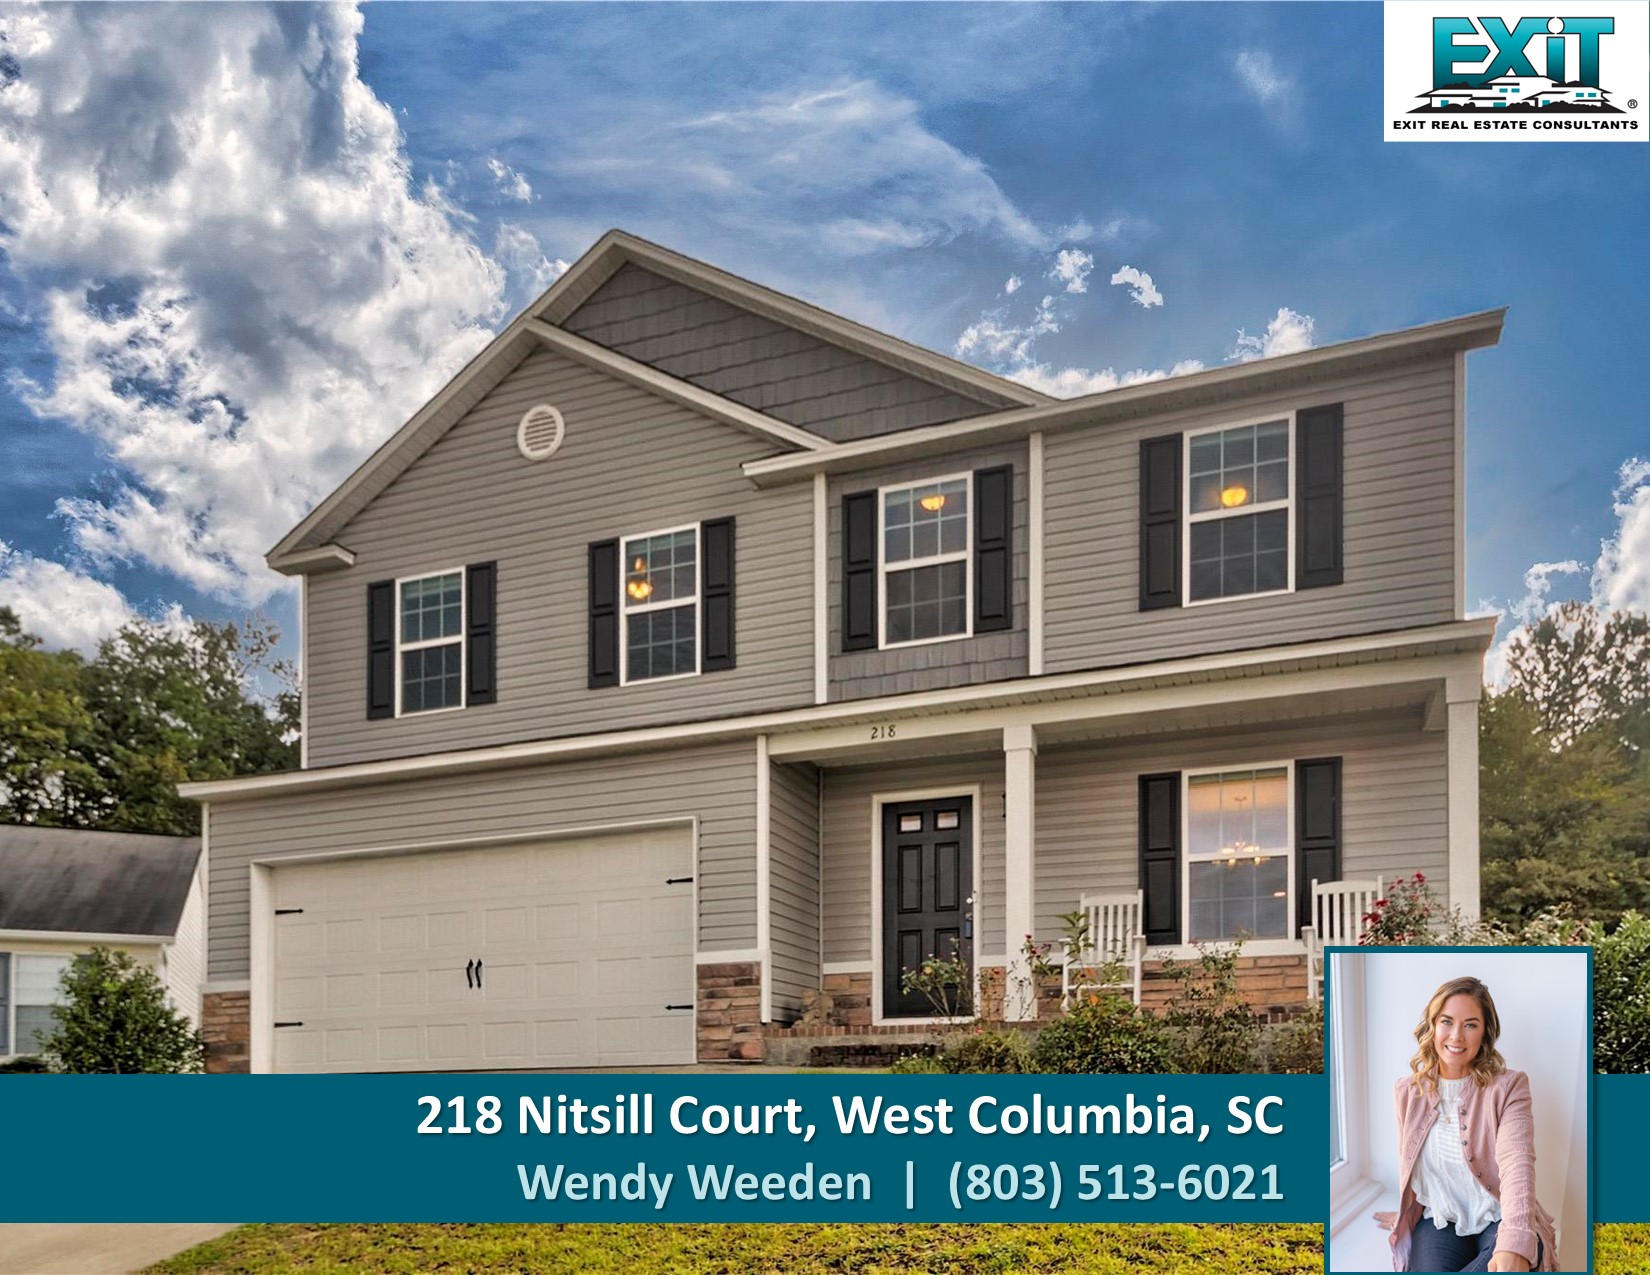 Just listed in Sycamore Ridge - West Columbia